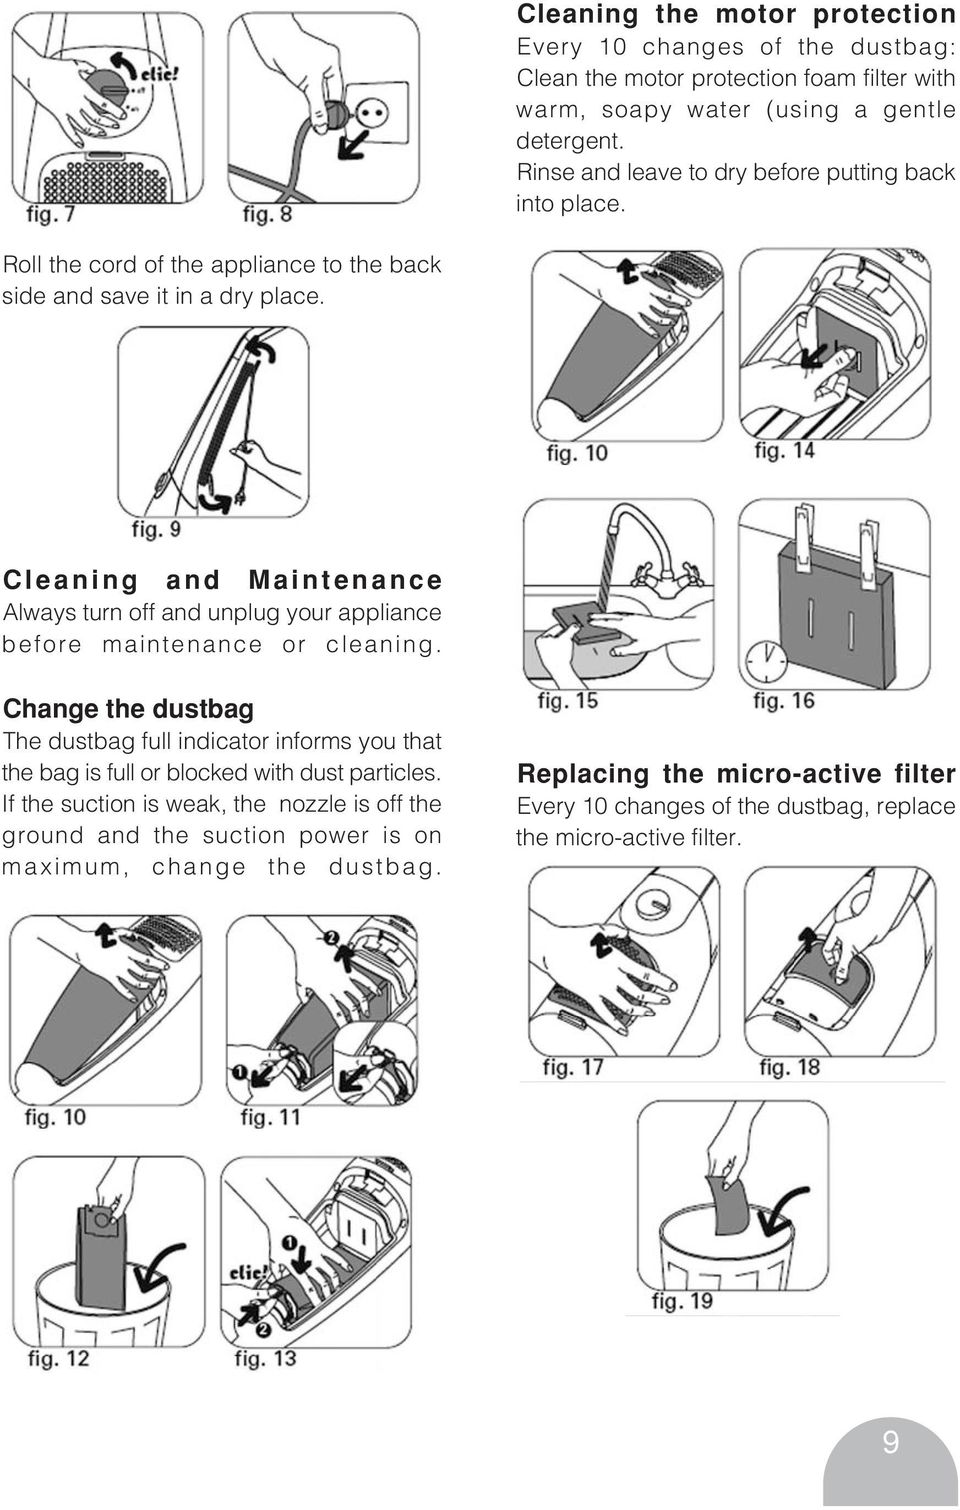 Cleaning and Maintenance Always turn off and unplug your appliance before maintenance or cleaning.